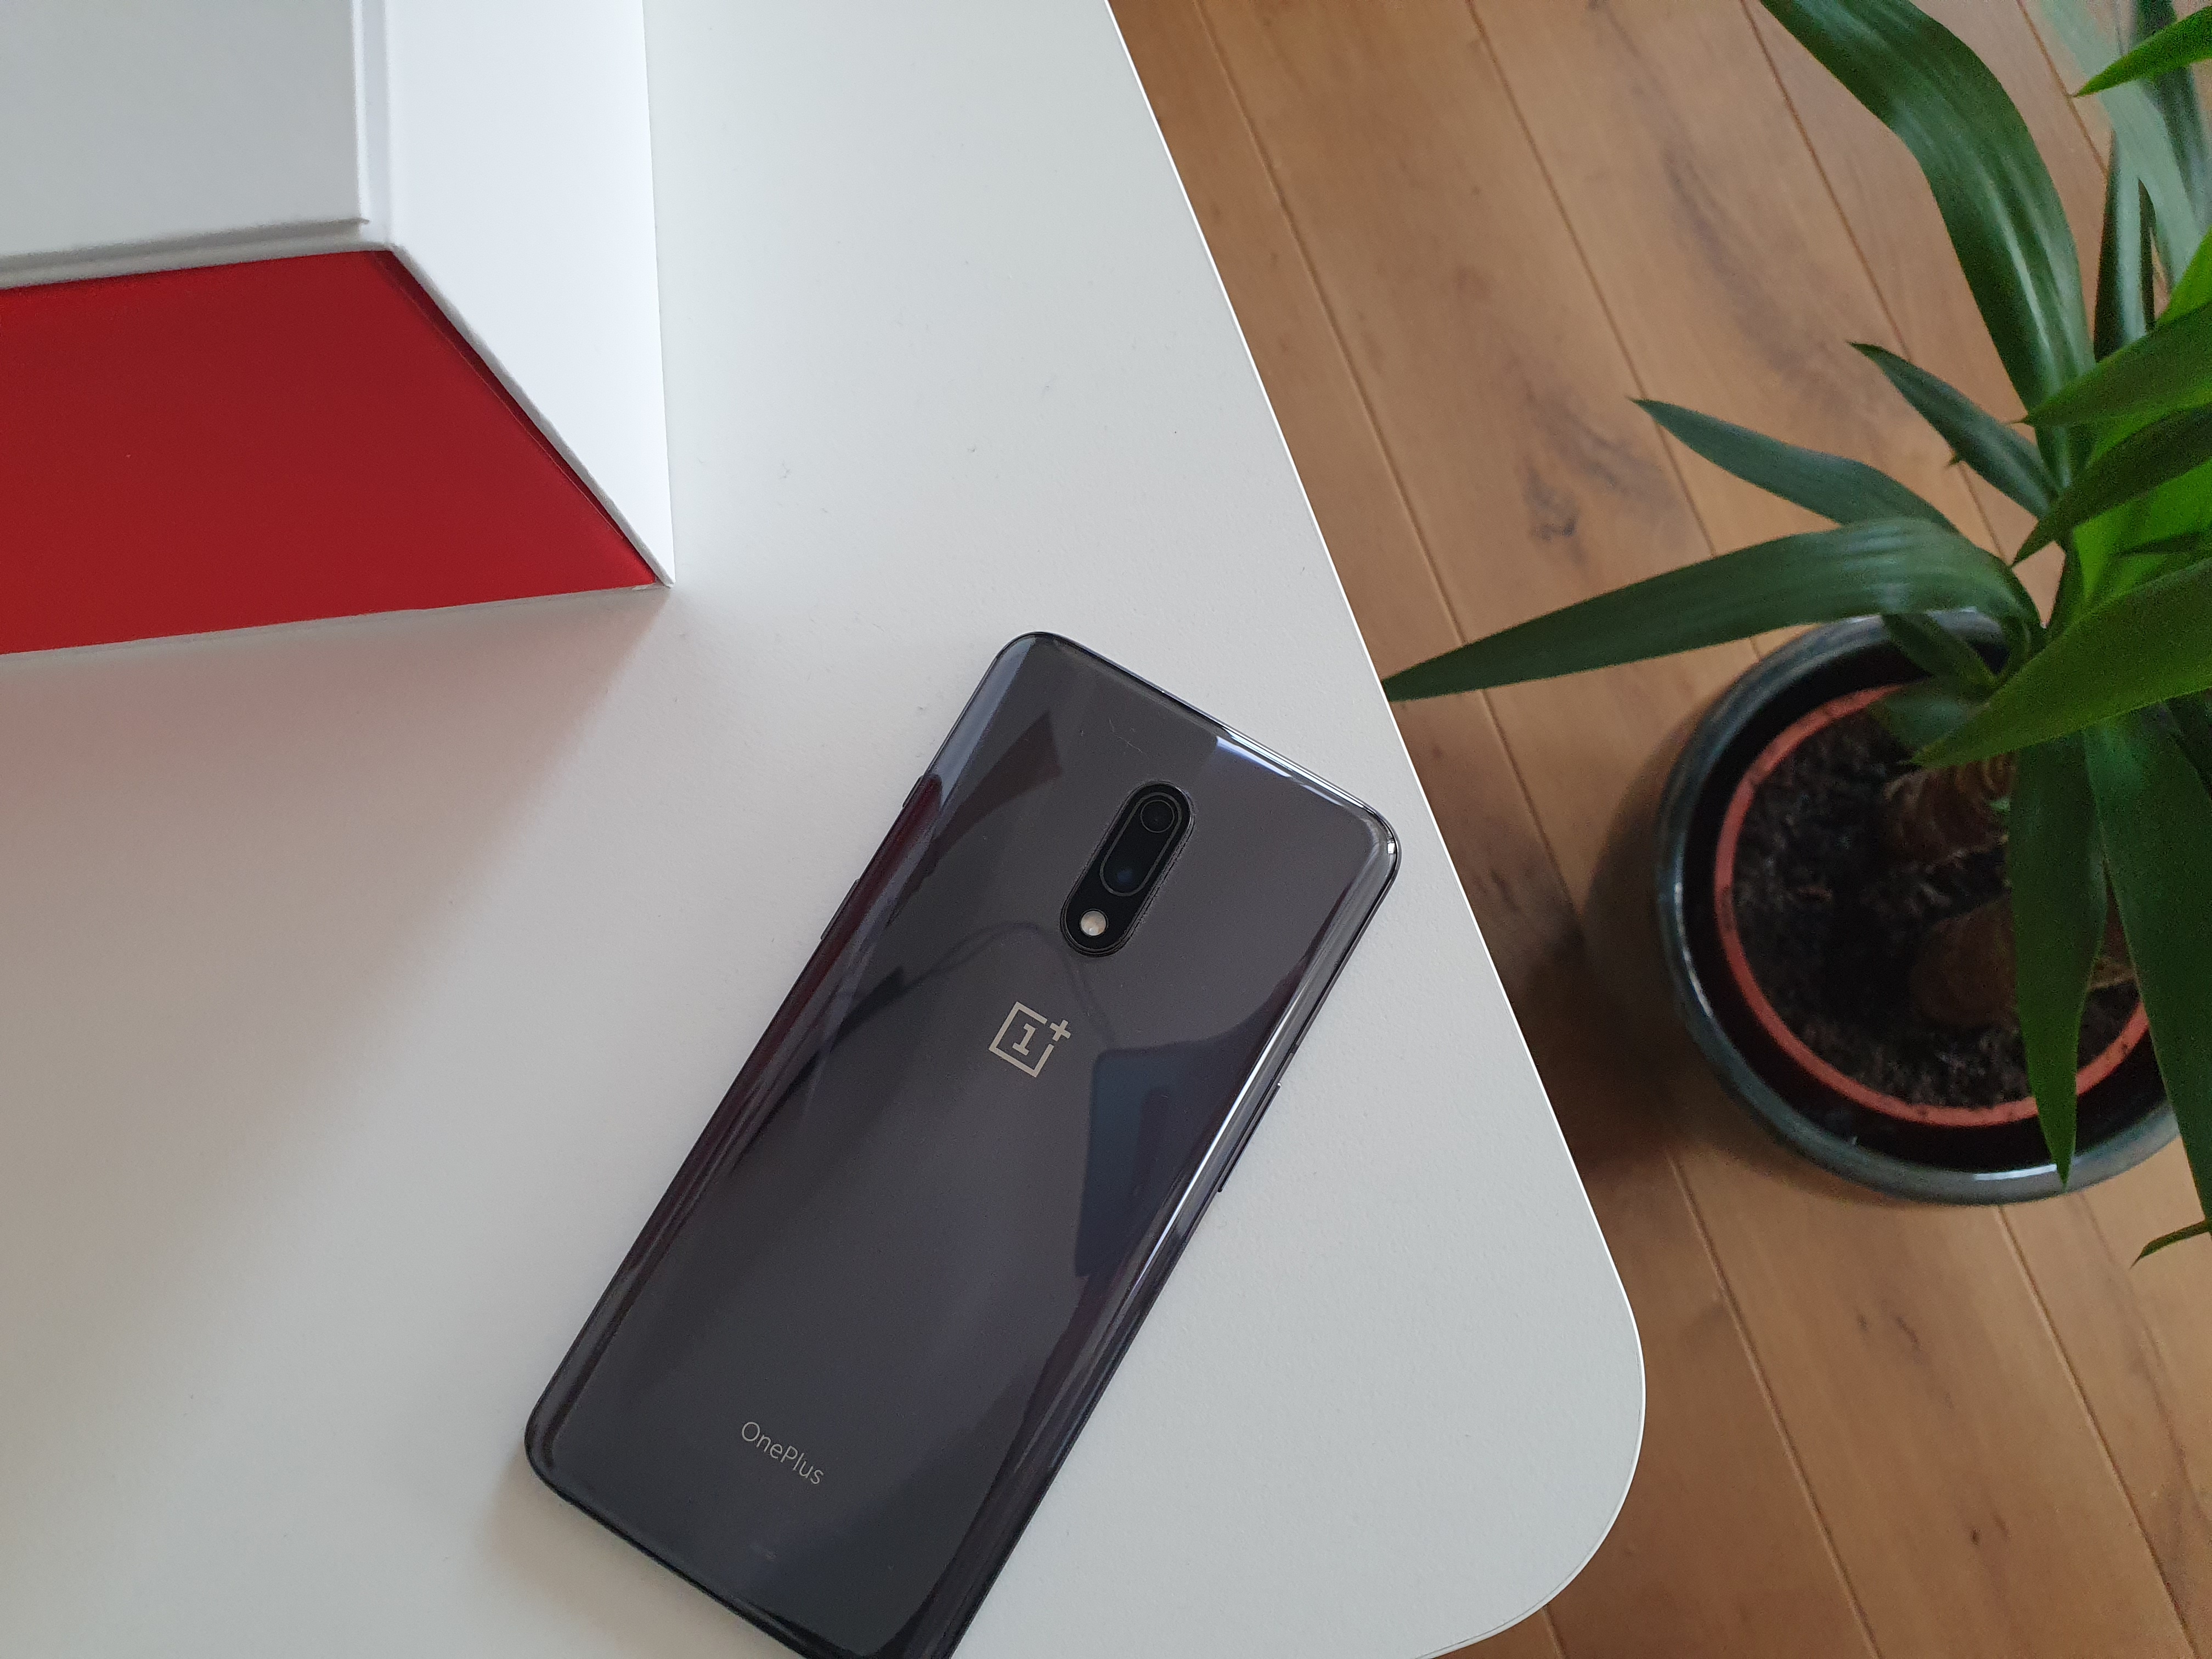 OnePlus 7 Review